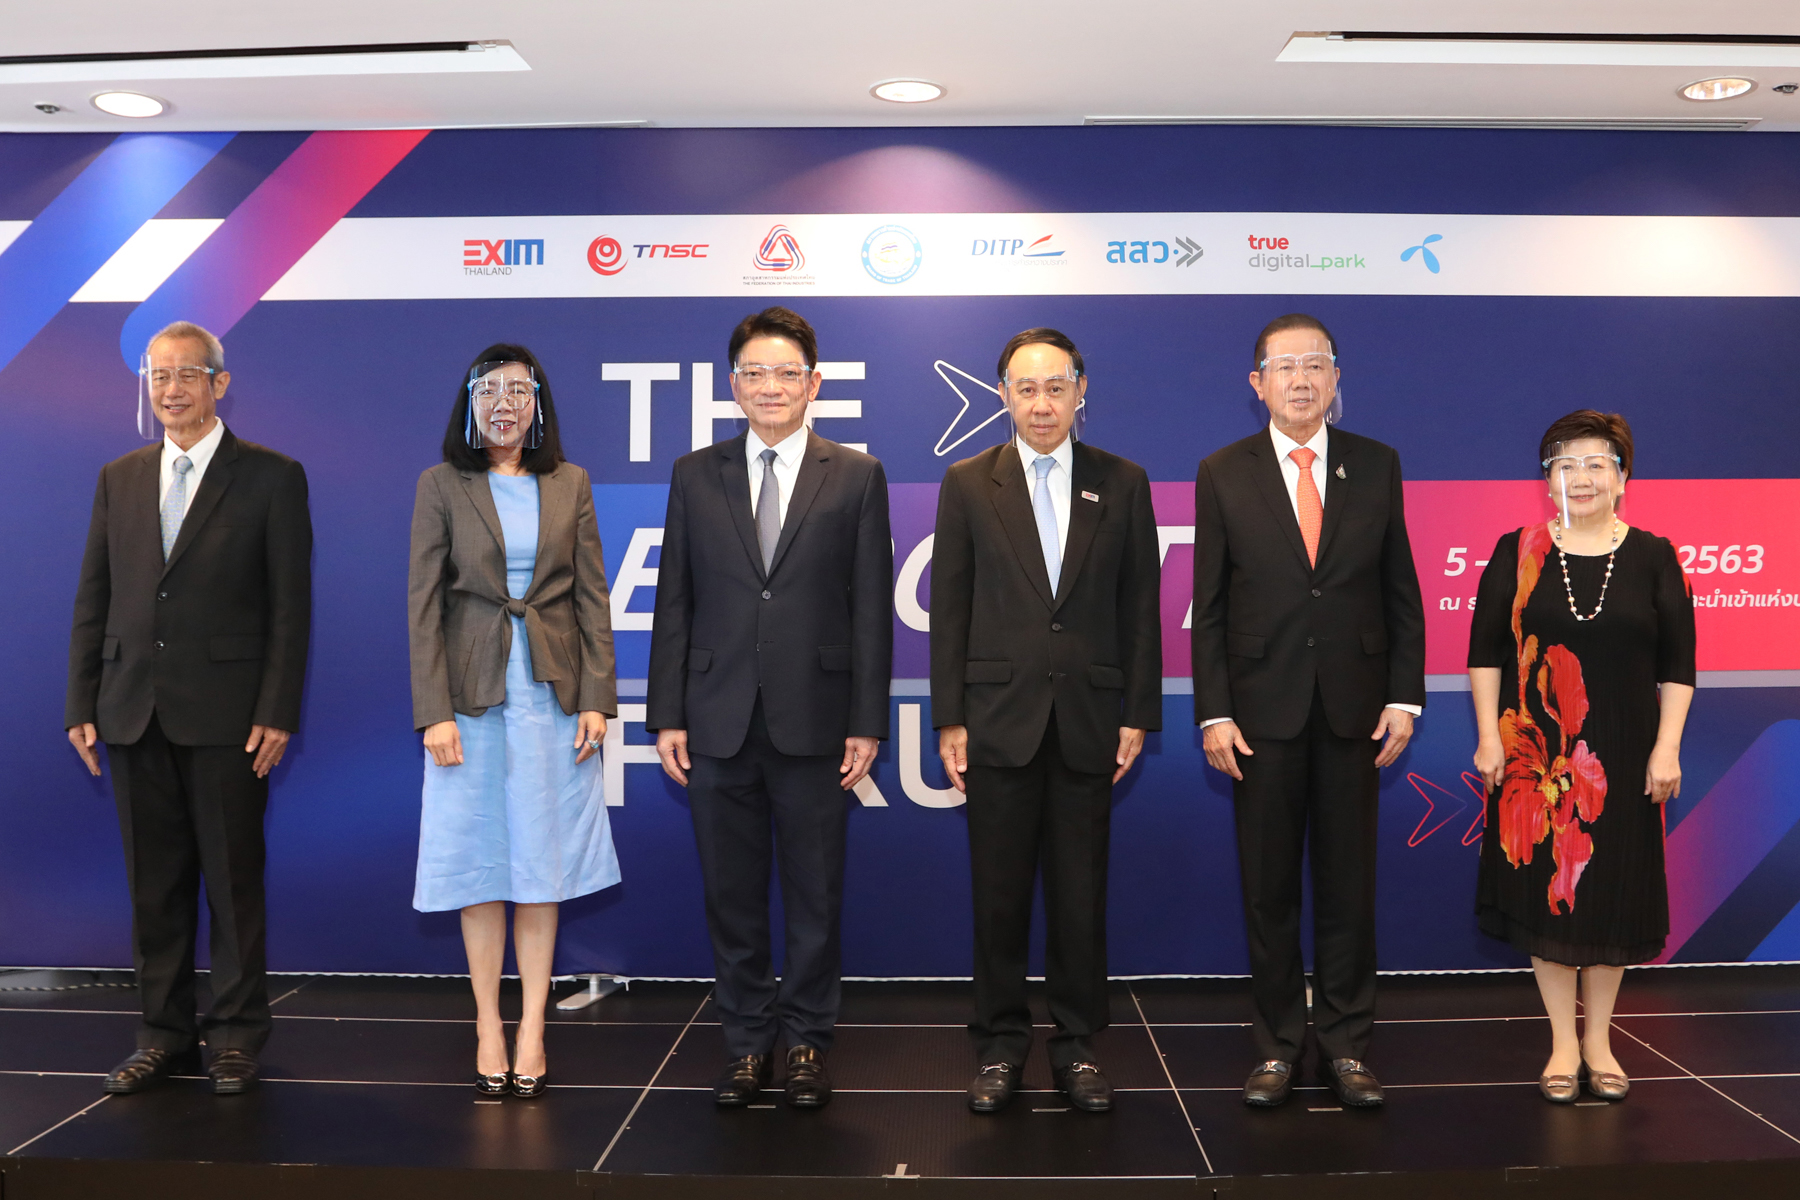 EXIM Thailand Holds Seminar to Enhance Knowledge of Export Business Planning Equipped with Tools for SME Exporters’ Readiness Assessment and Business Solutions